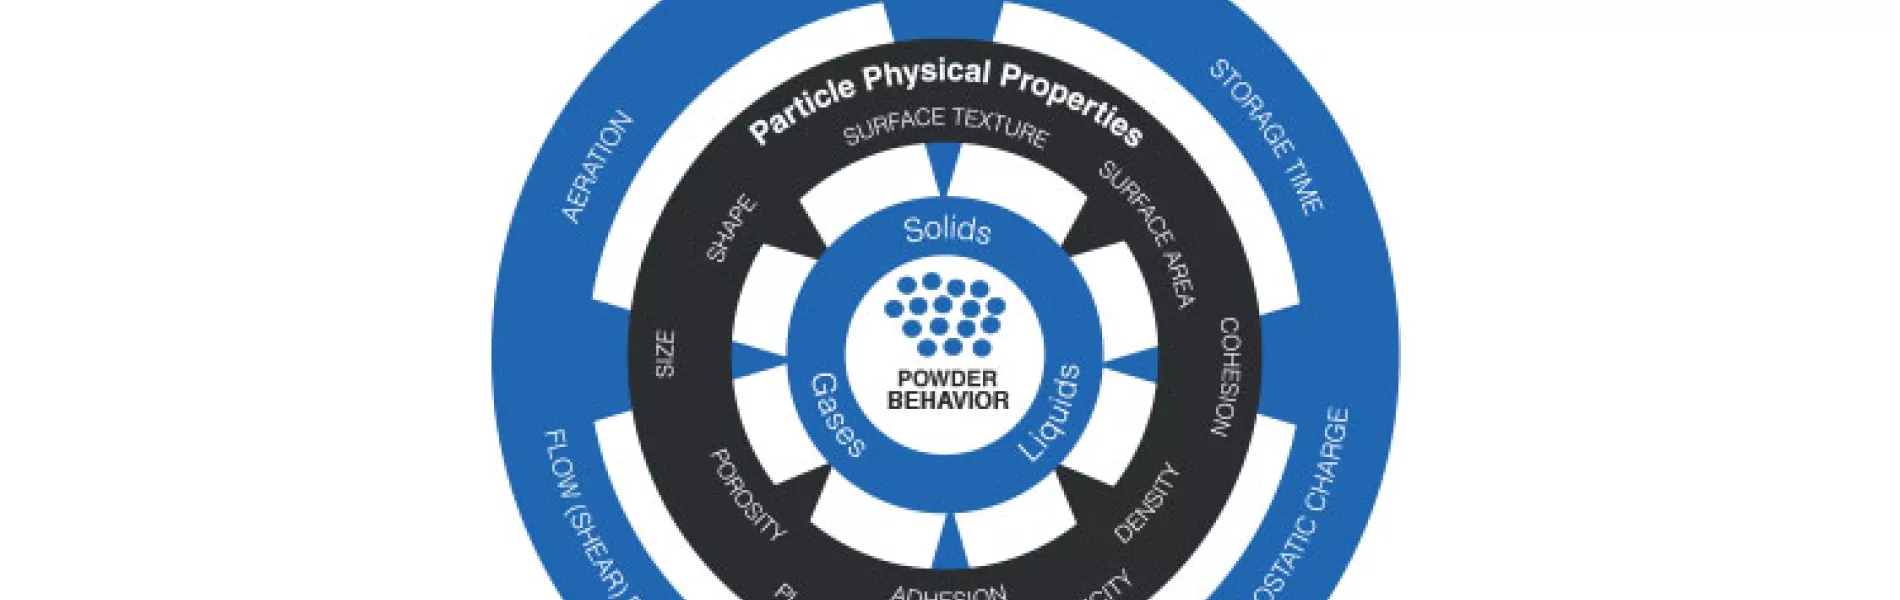 Powder behavior is the result of a complex network of interactions between particle properties and system variables.